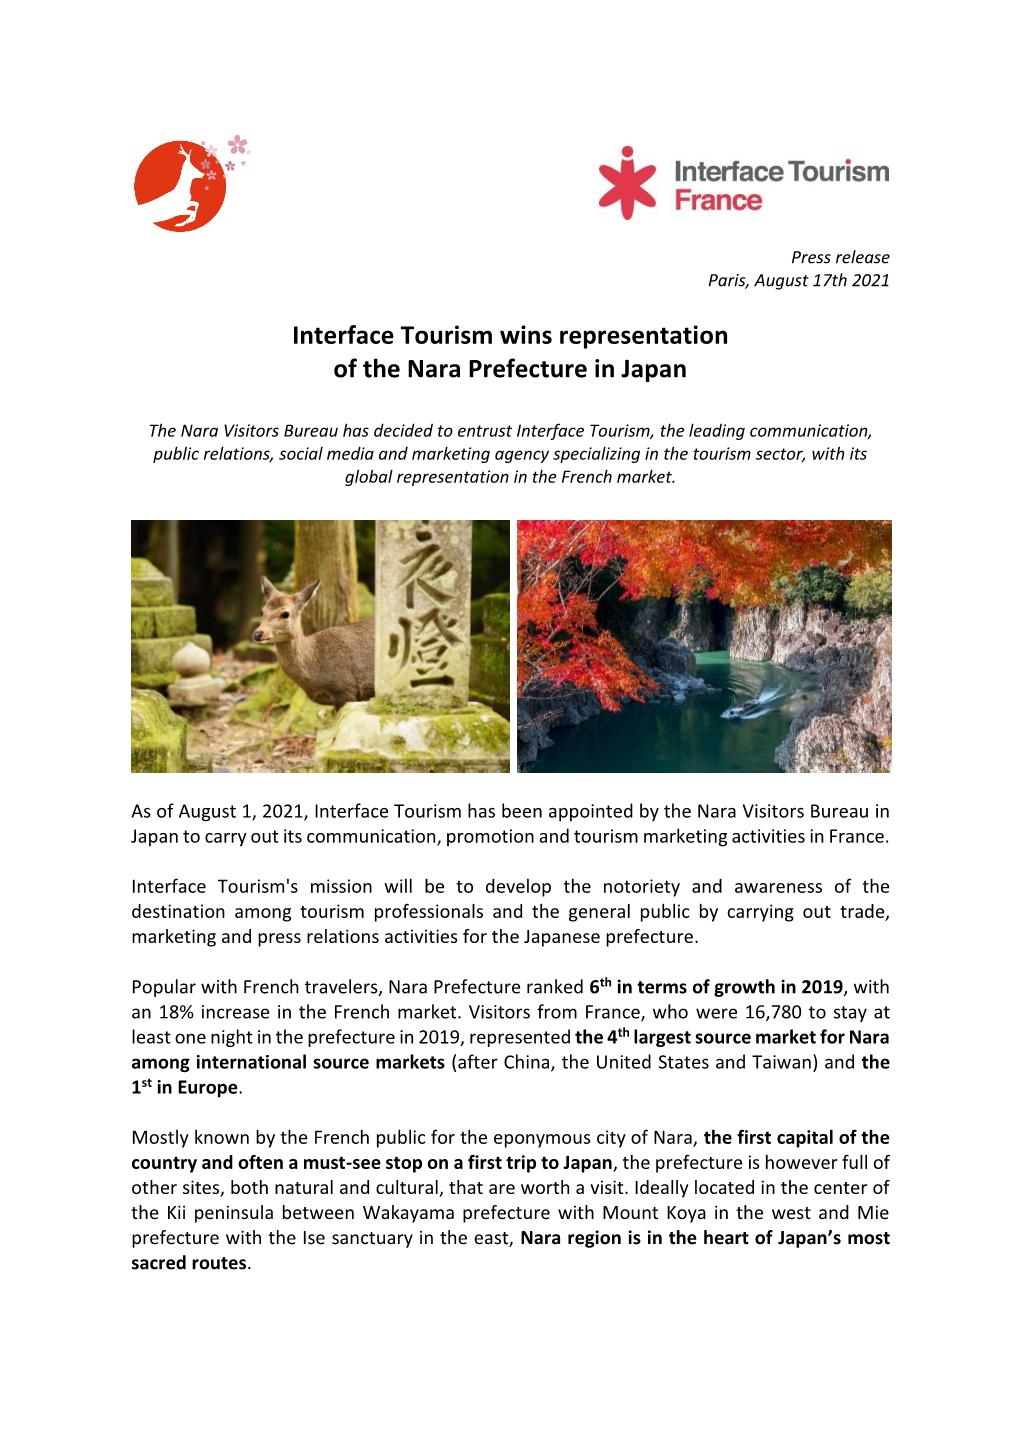 Interface Tourism Wins Representation of the Nara Prefecture in Japan